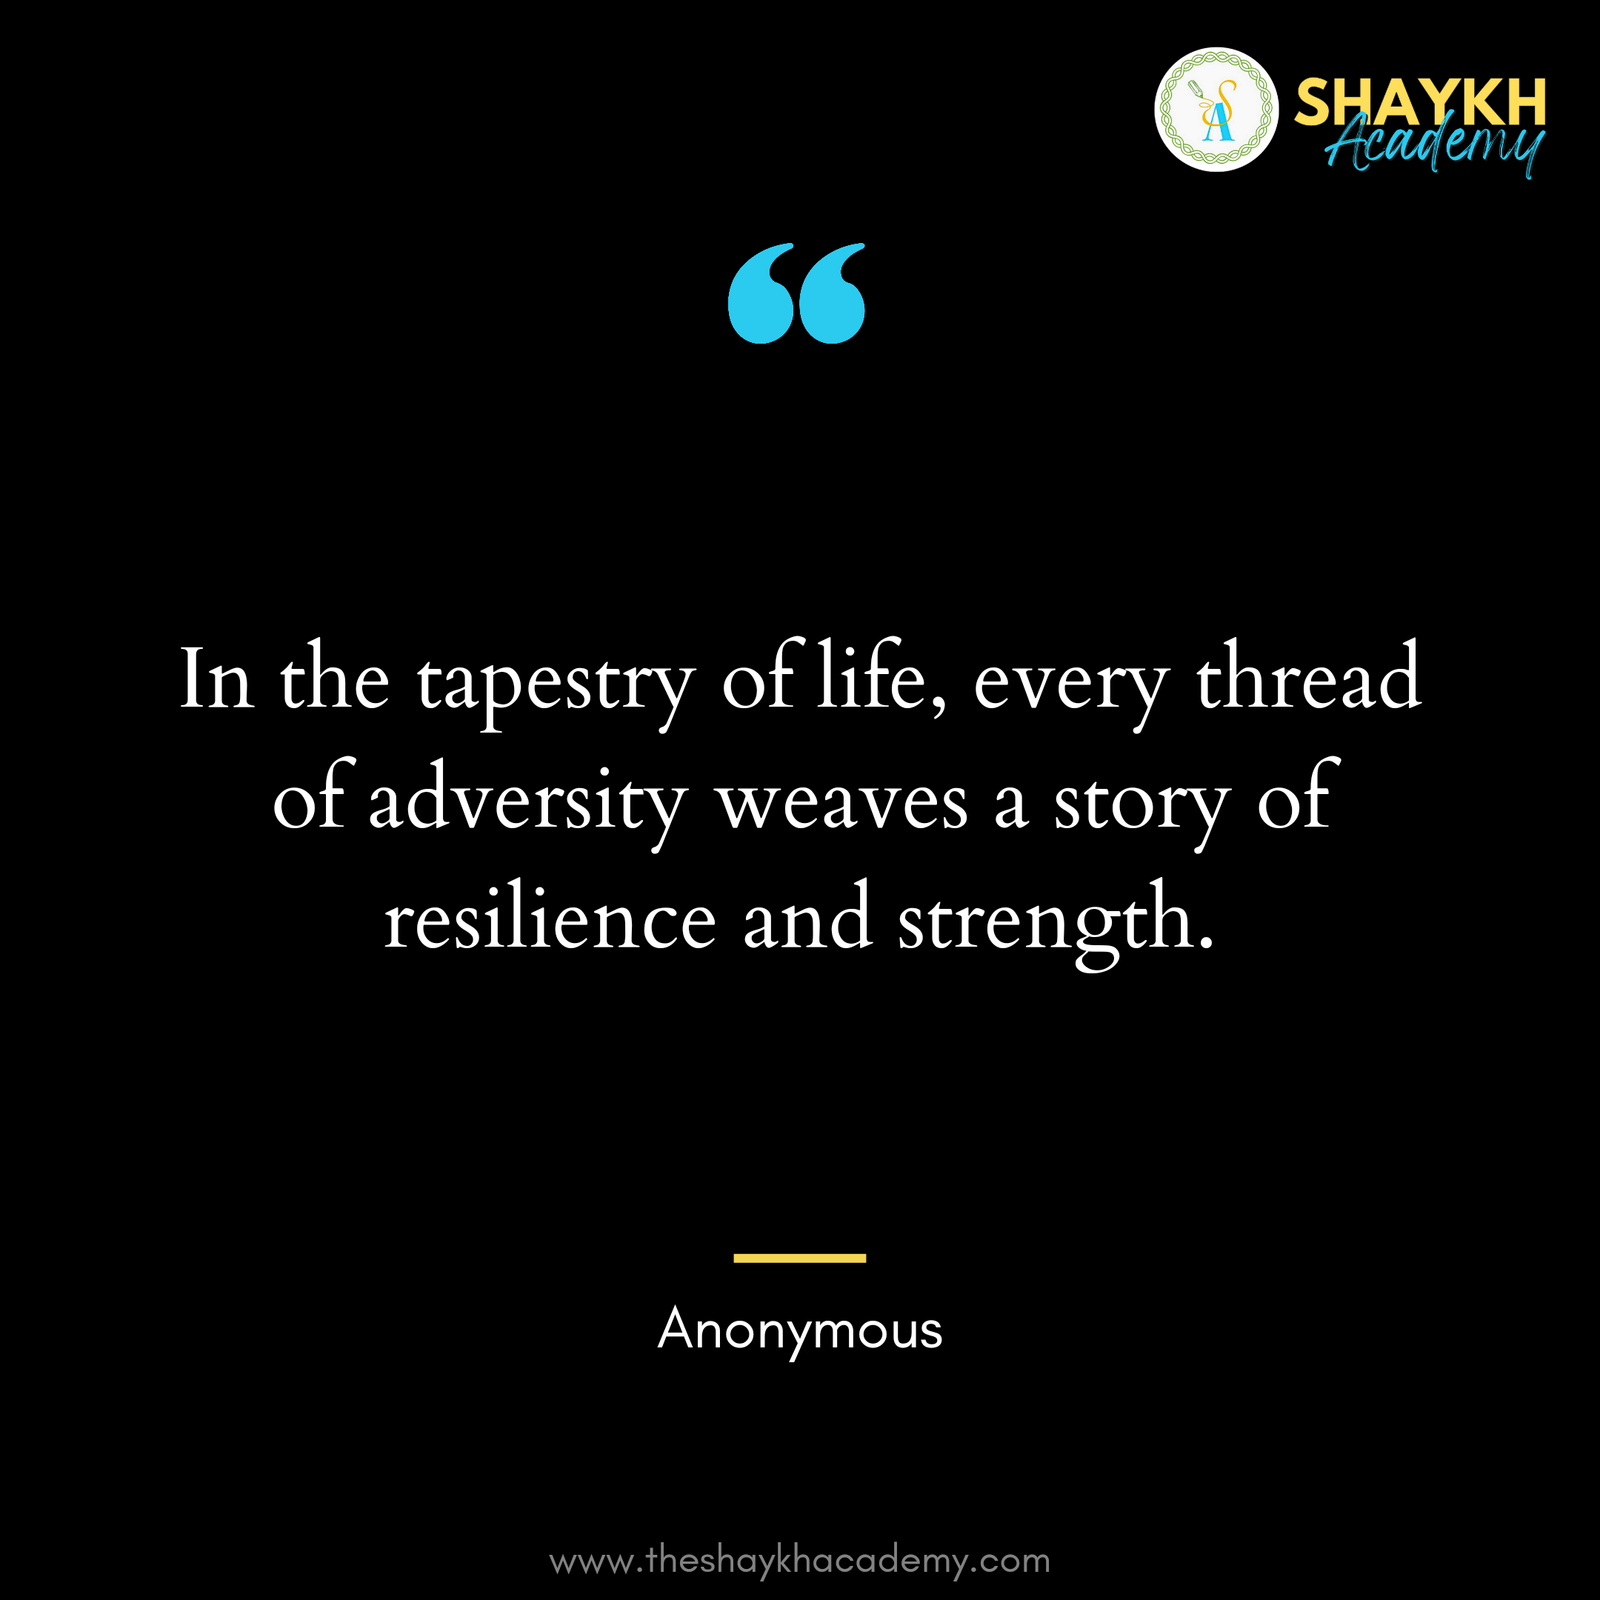 In the tapestry of life, every thread of adversity weaves a story of resilience and strength.